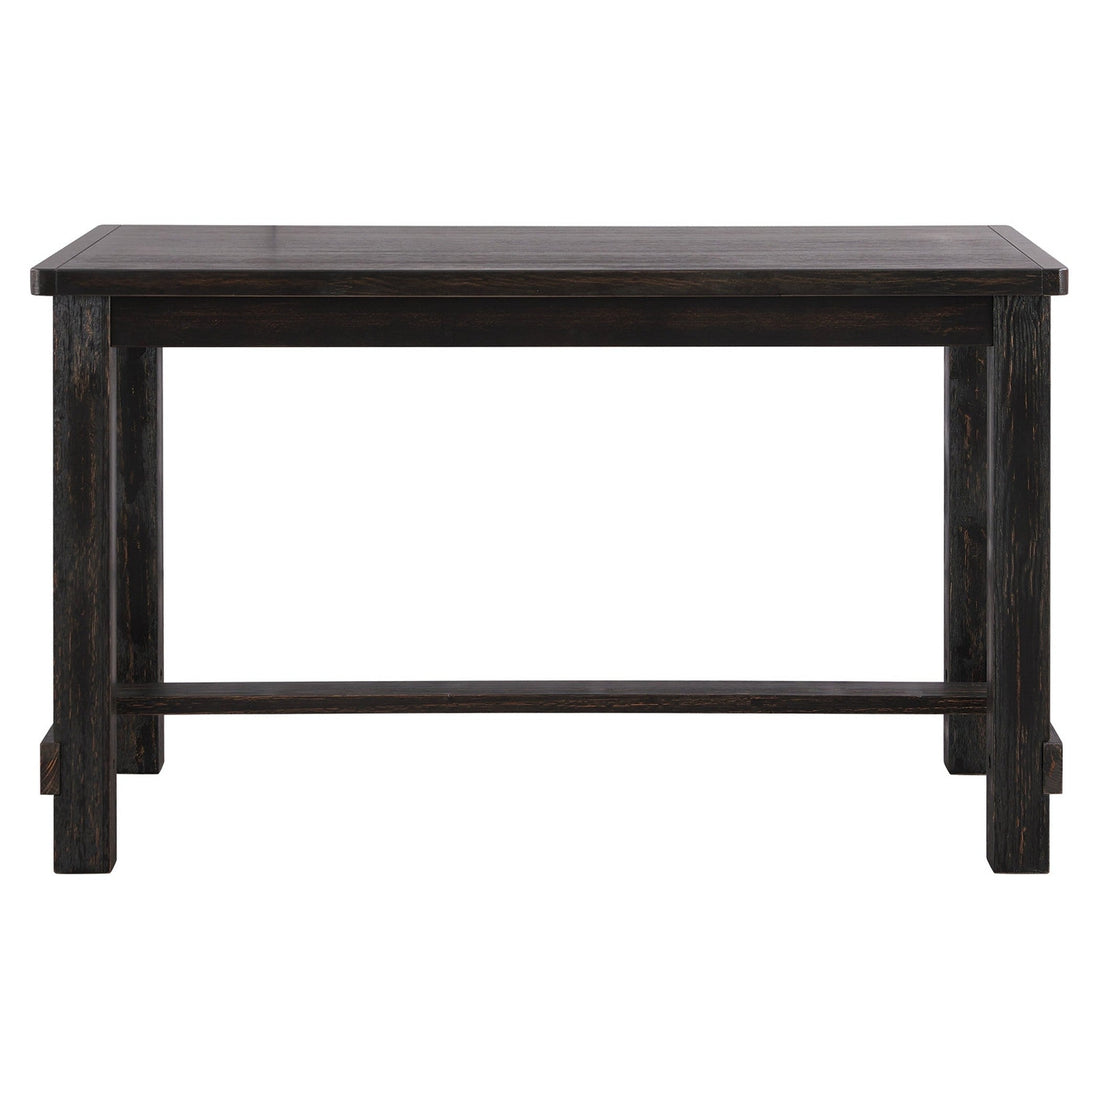 Jeanette Counter Height Dining Table Ash-D702-13